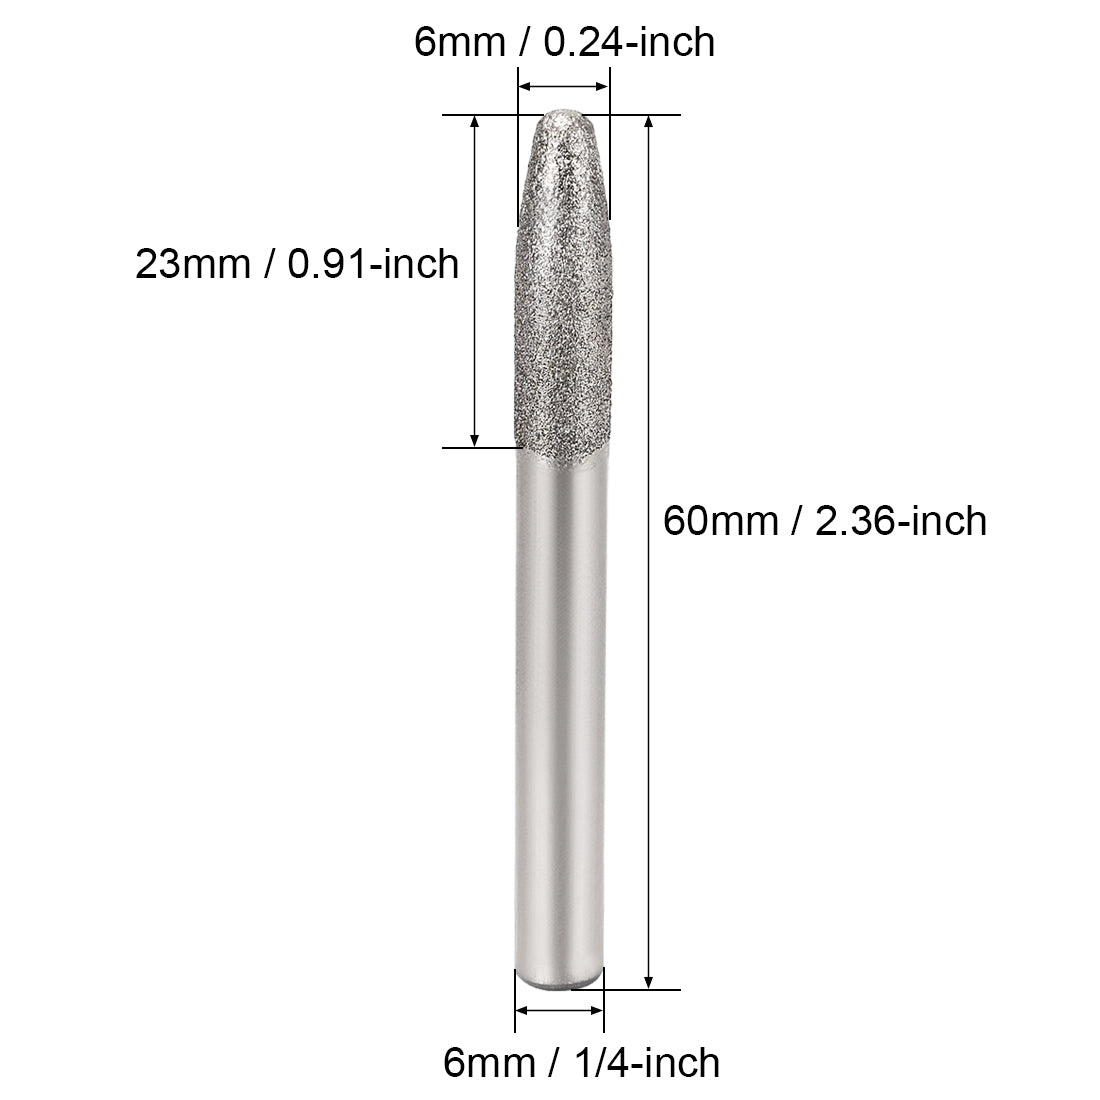 Uxcell Uxcell Diamond Burrs Grinding Drill Bits for Carving Rotary Tool 1/4-Inch Shank 10mm Tapered 150 Grit 10 Pcs